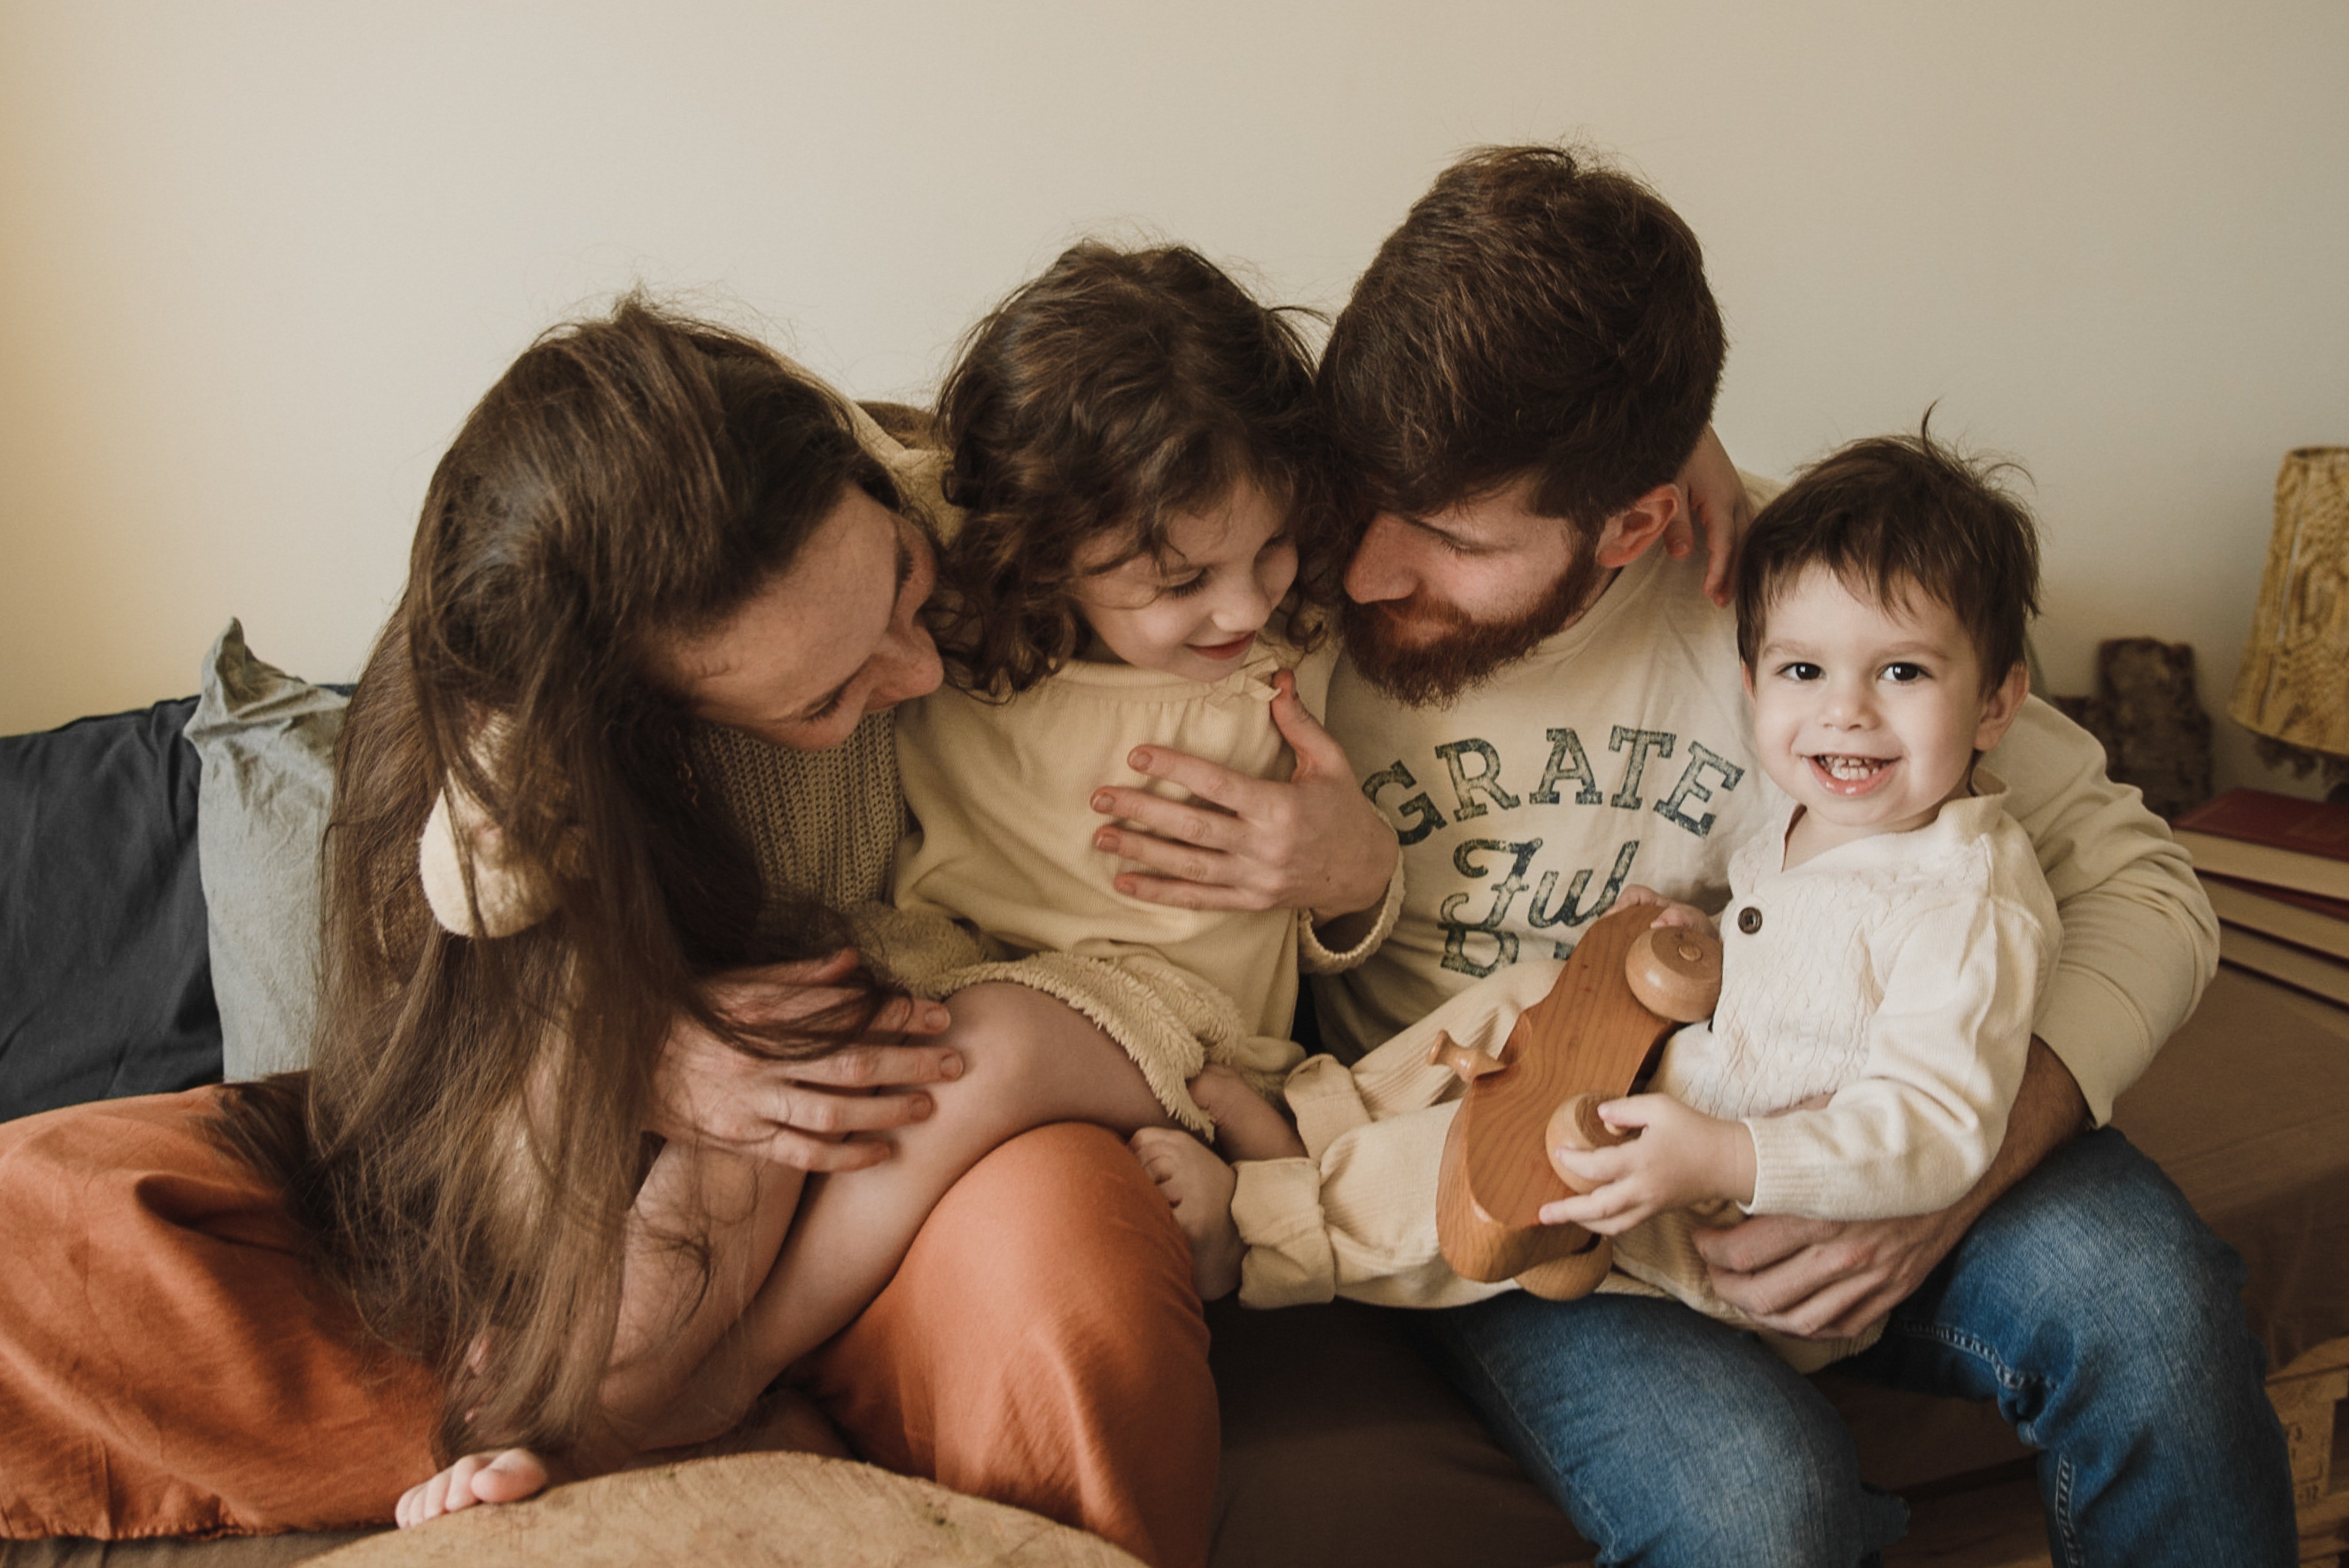 The Watsons taught Holly the real value of a family. | Source: Pexels